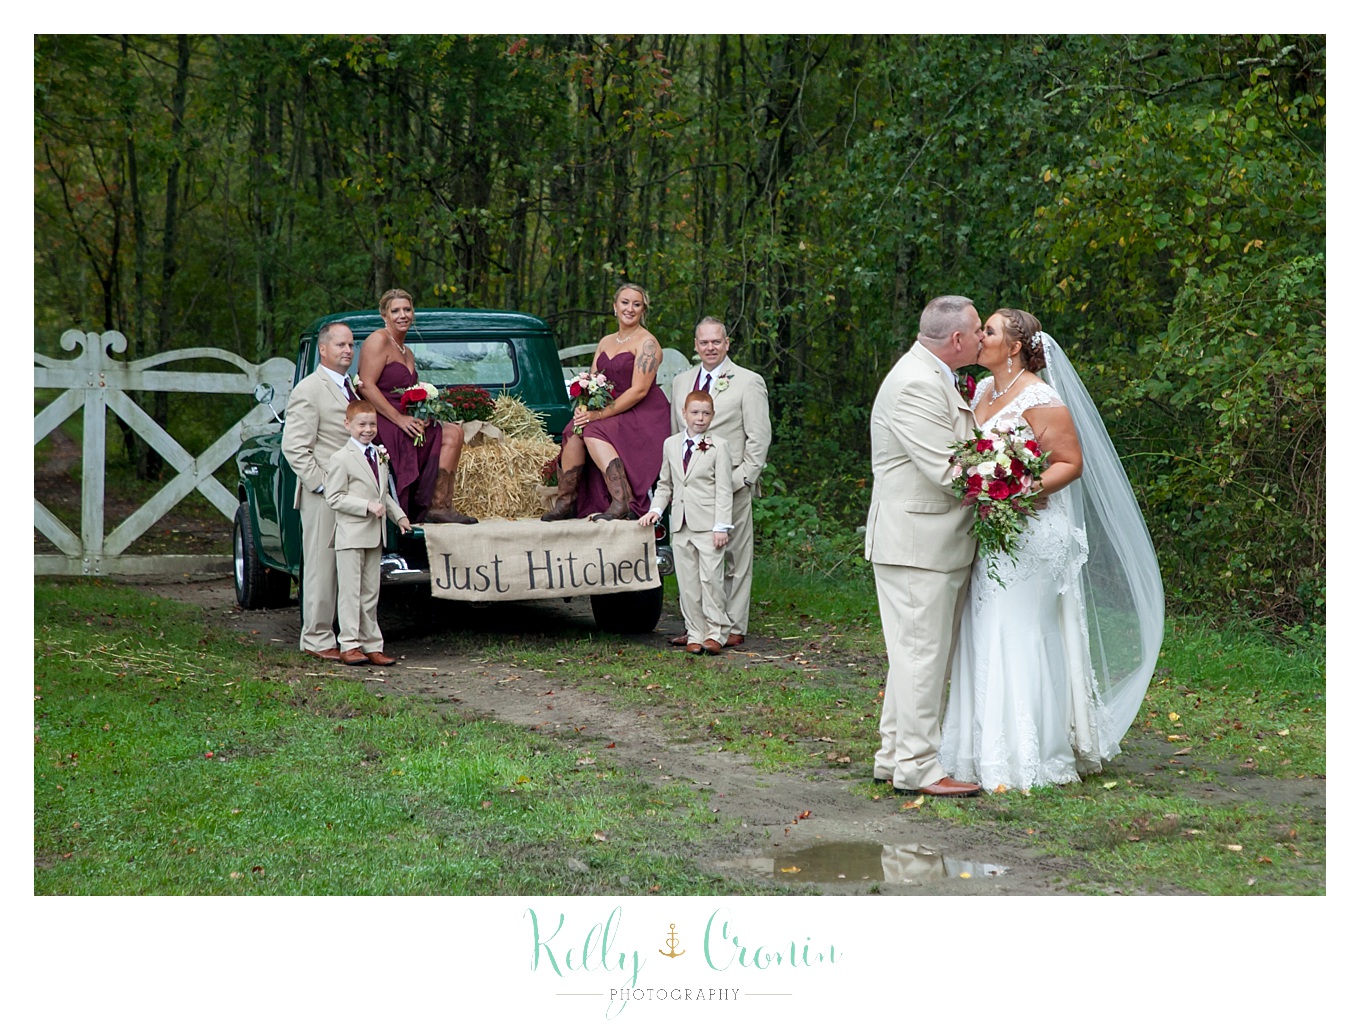 A bride and groom give a kiss | Kelly Cronin Photography | Bittersweet Farm